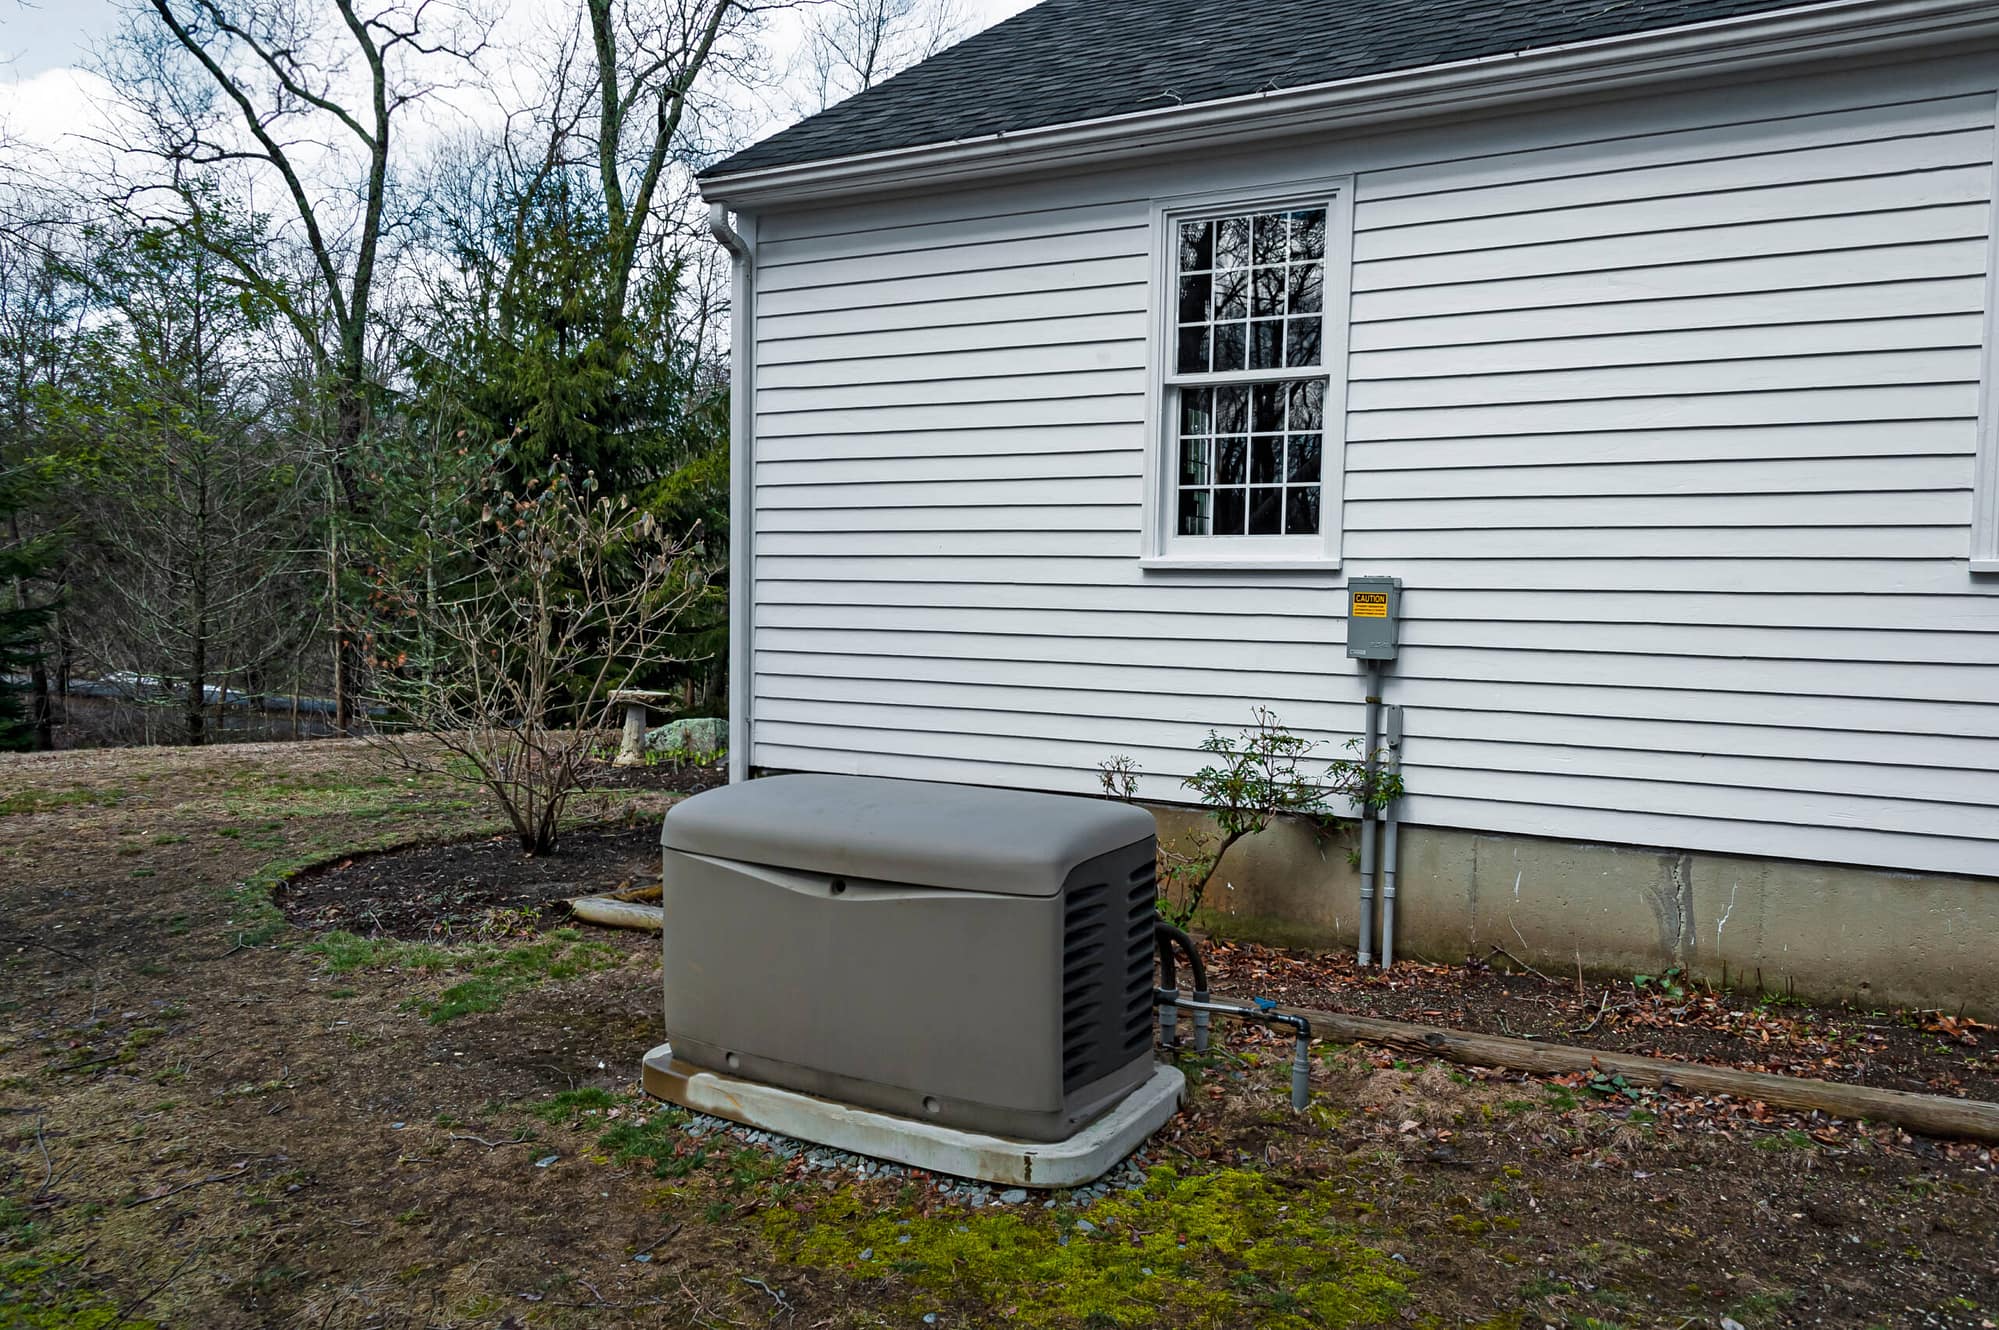 A representation of the big factors to consider when finding the cost to install a Generac generator: The generator, cement pad, wiring, and transfer switch, outside a home.